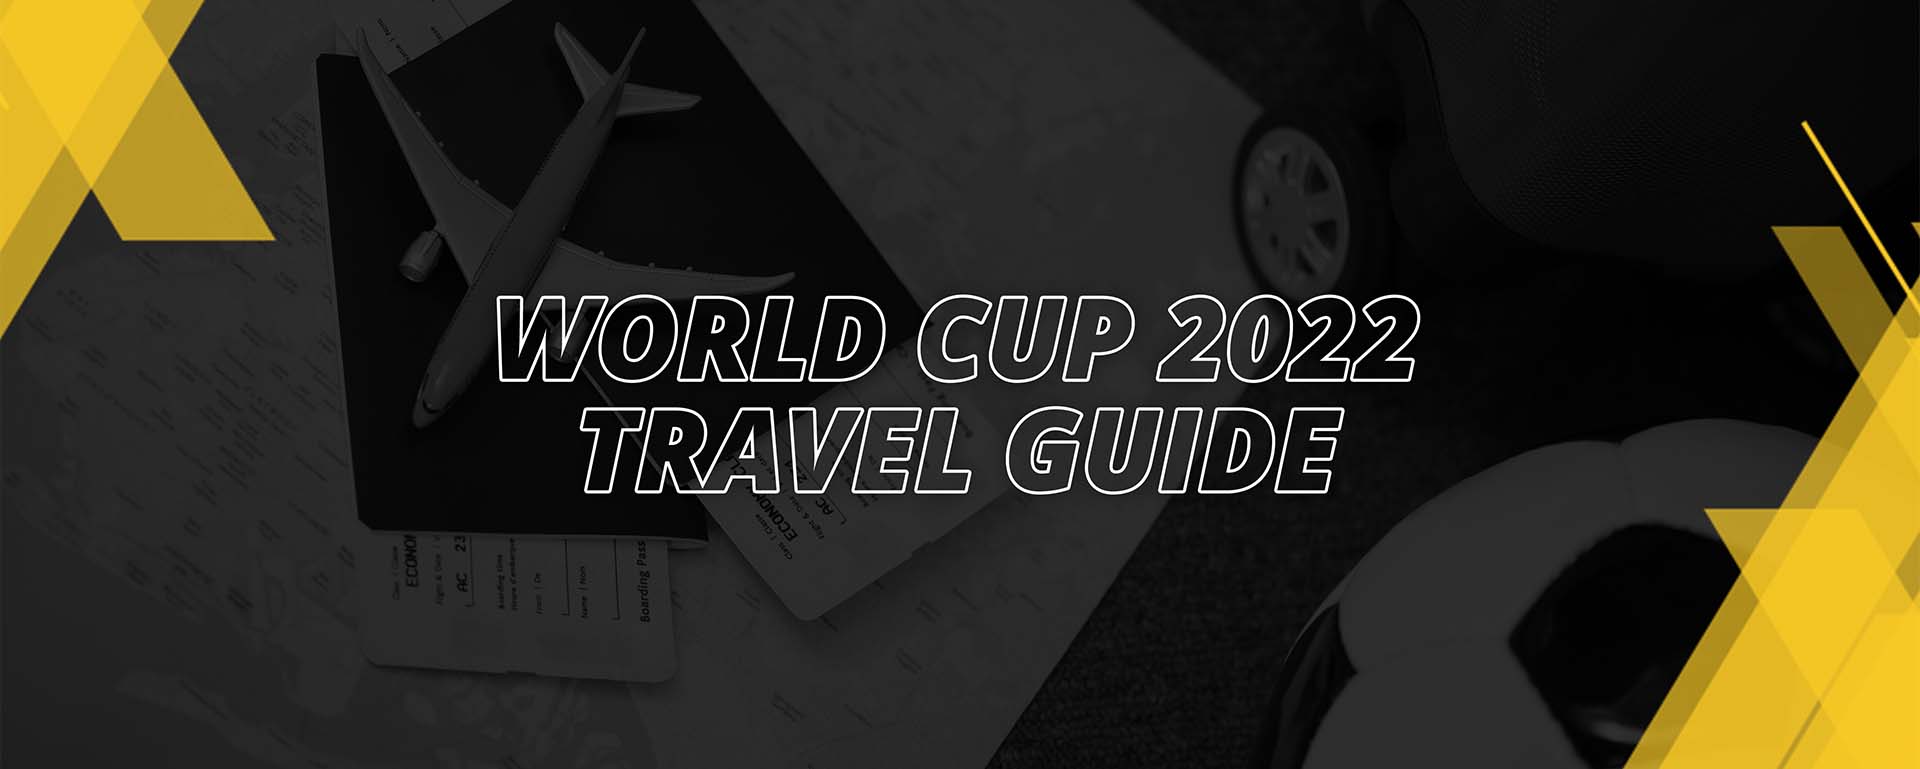 World cup 2022 Travel Guide